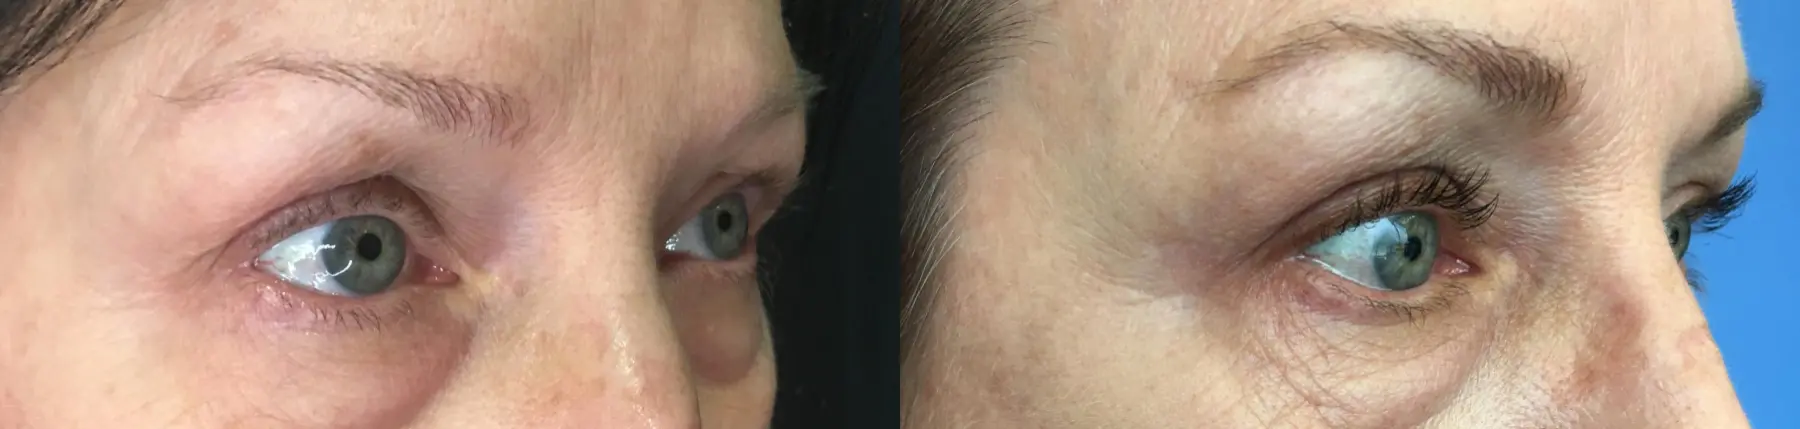 Eyelid Surgery: Patient 24 - Before and After 2